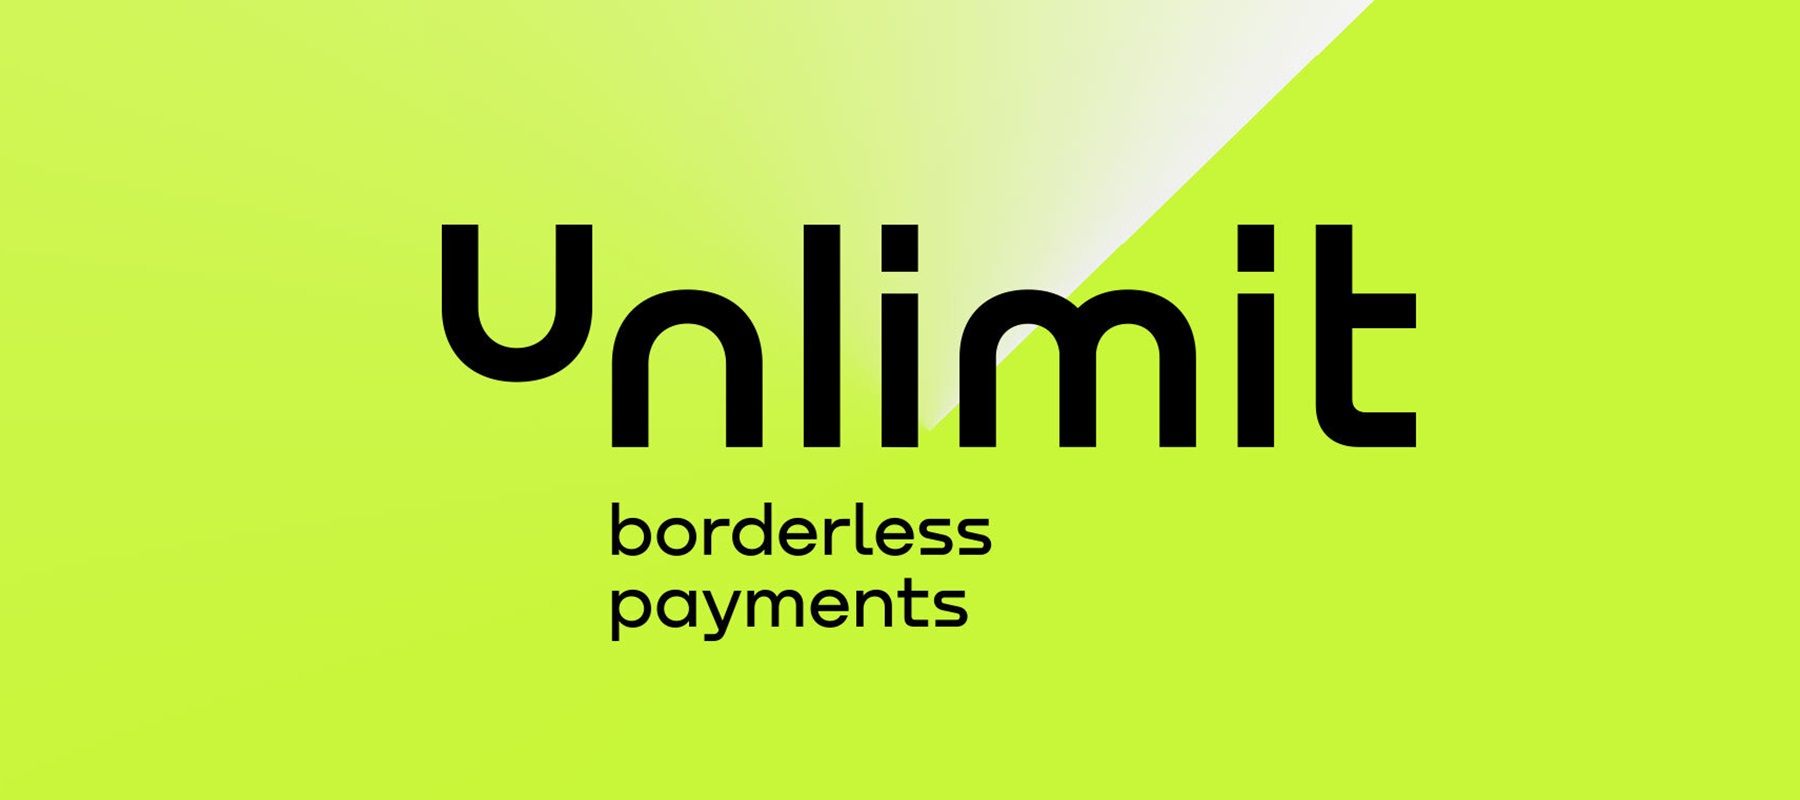 London-based Fintech Unlimit: Pioneering Fintech Expansion in Tanzania